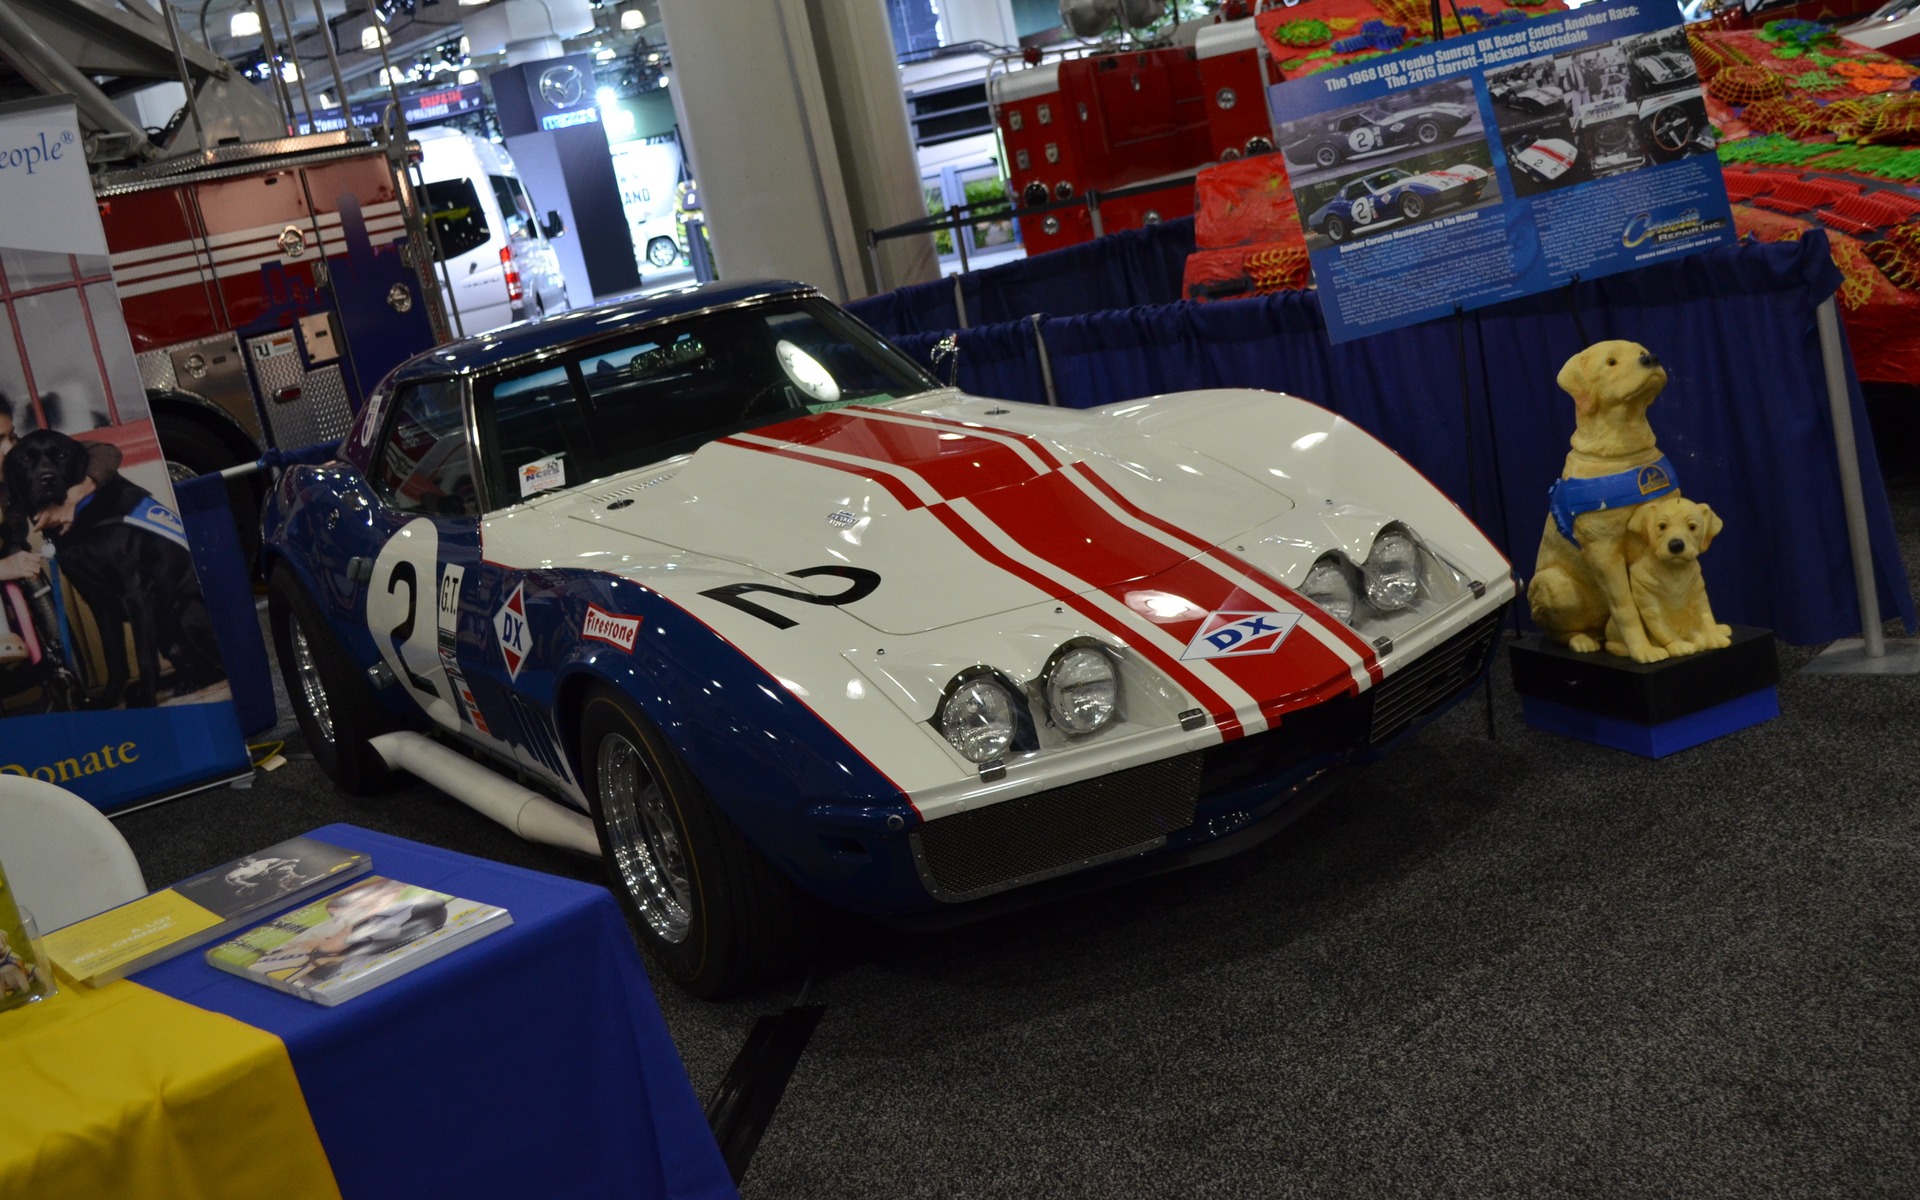 This 1968 Corvette L88 has been built and raced by Don Yenko.